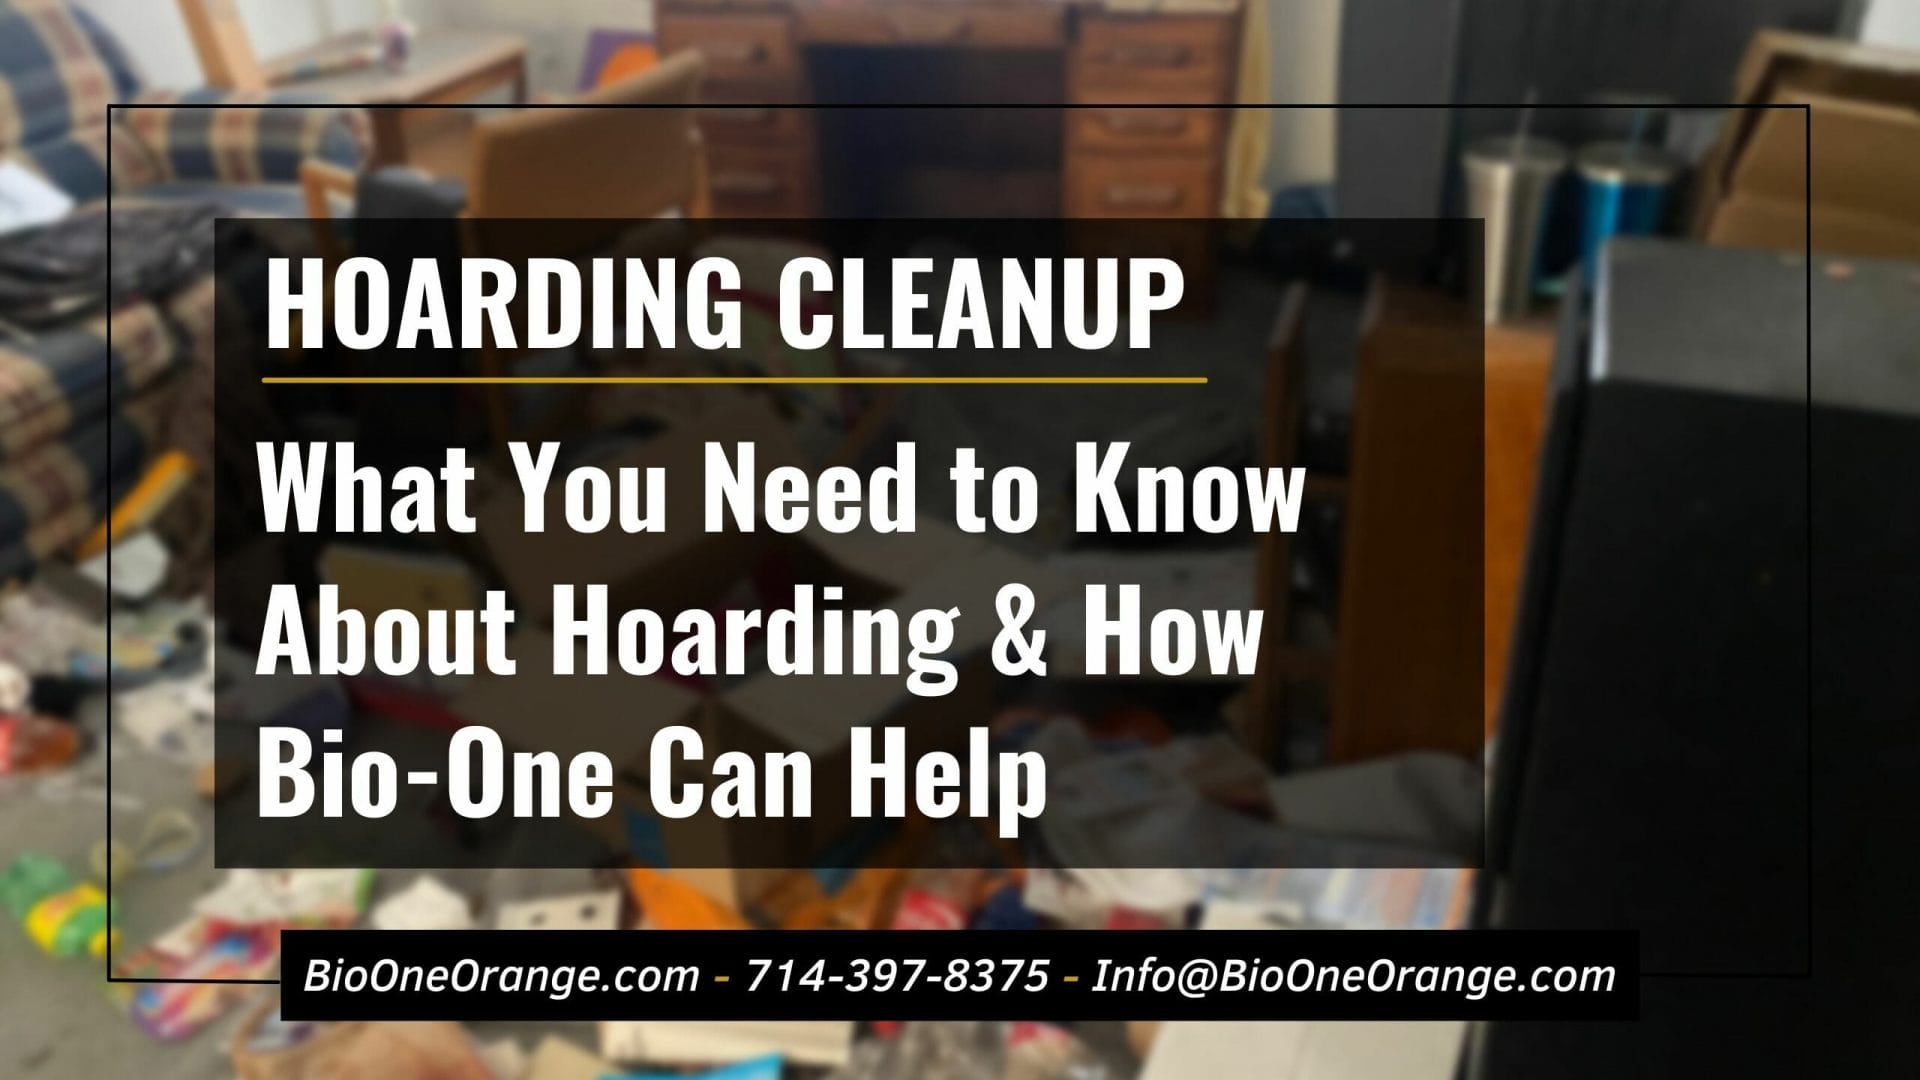 What You Need to Know About Hoarding & How Bio-One Can Help